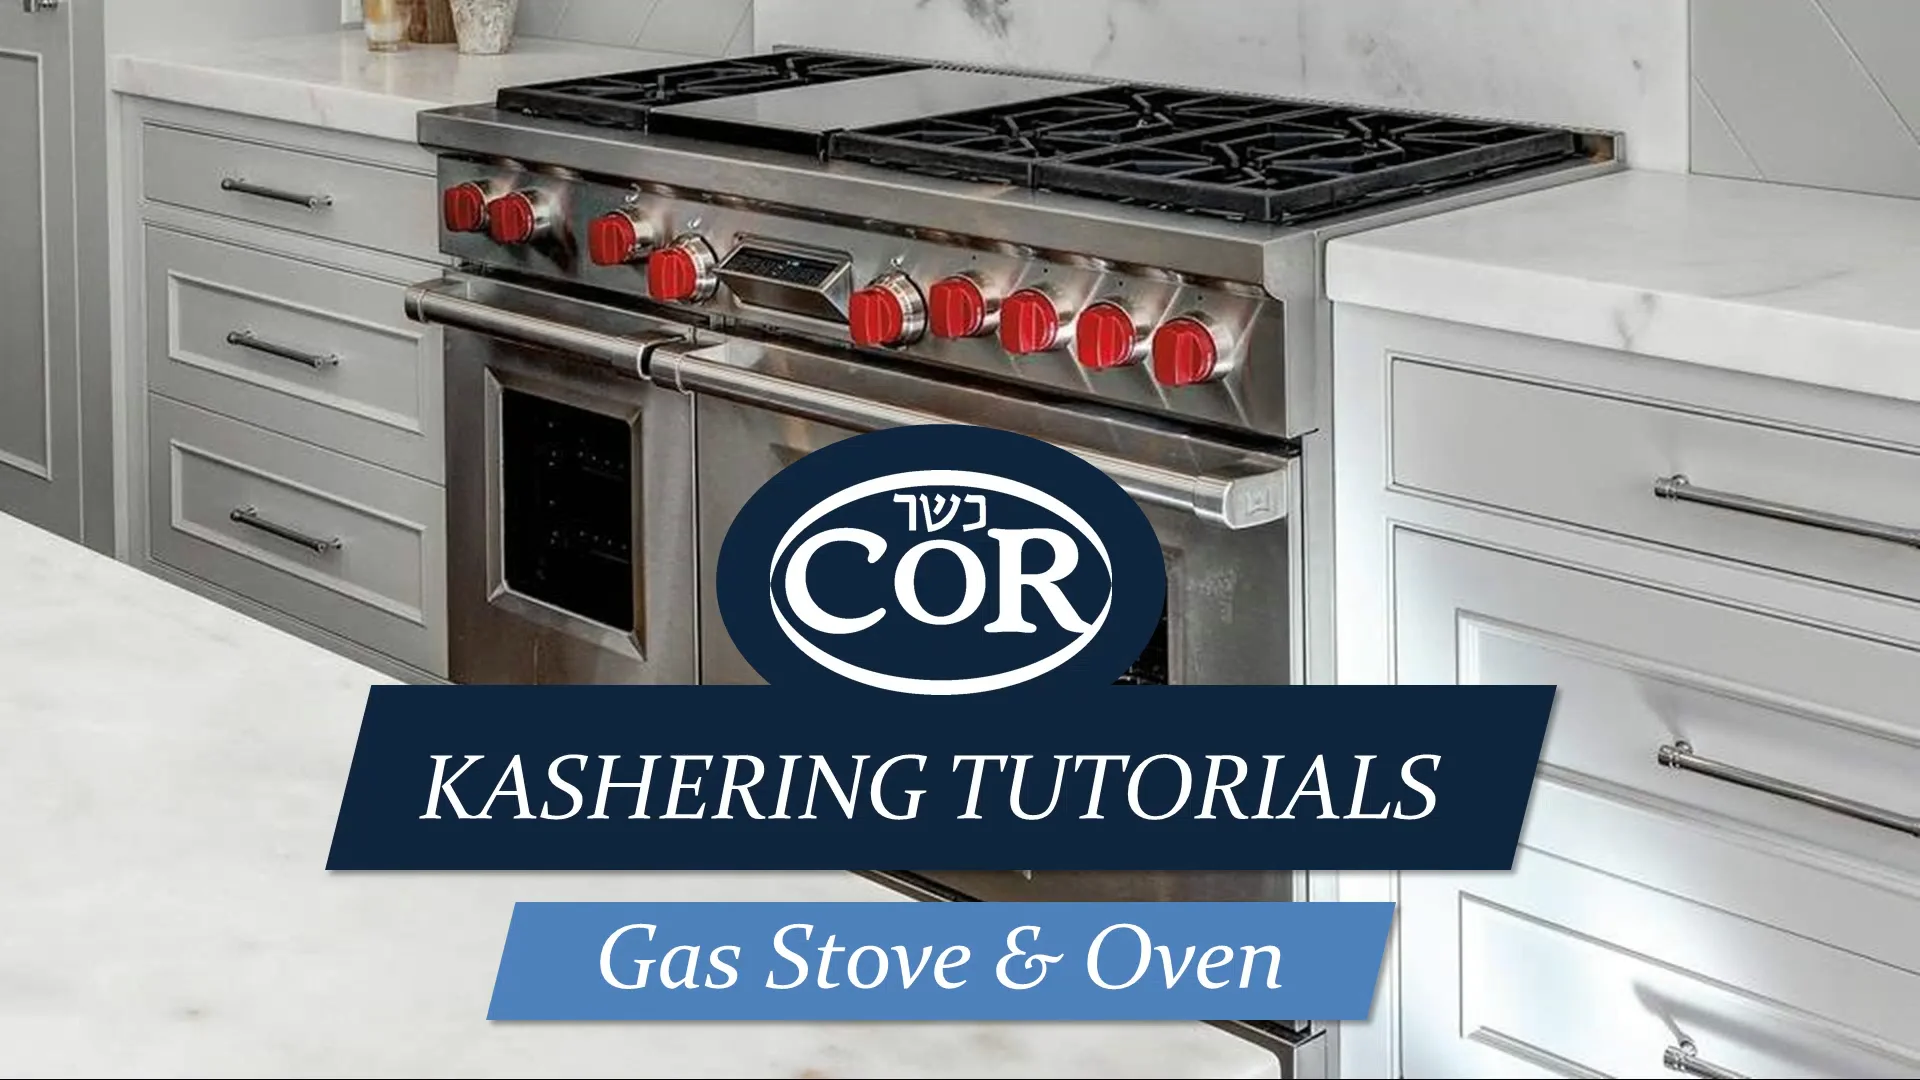 Video: How to Kasher an Oven & Stove with an Electric Element - COR